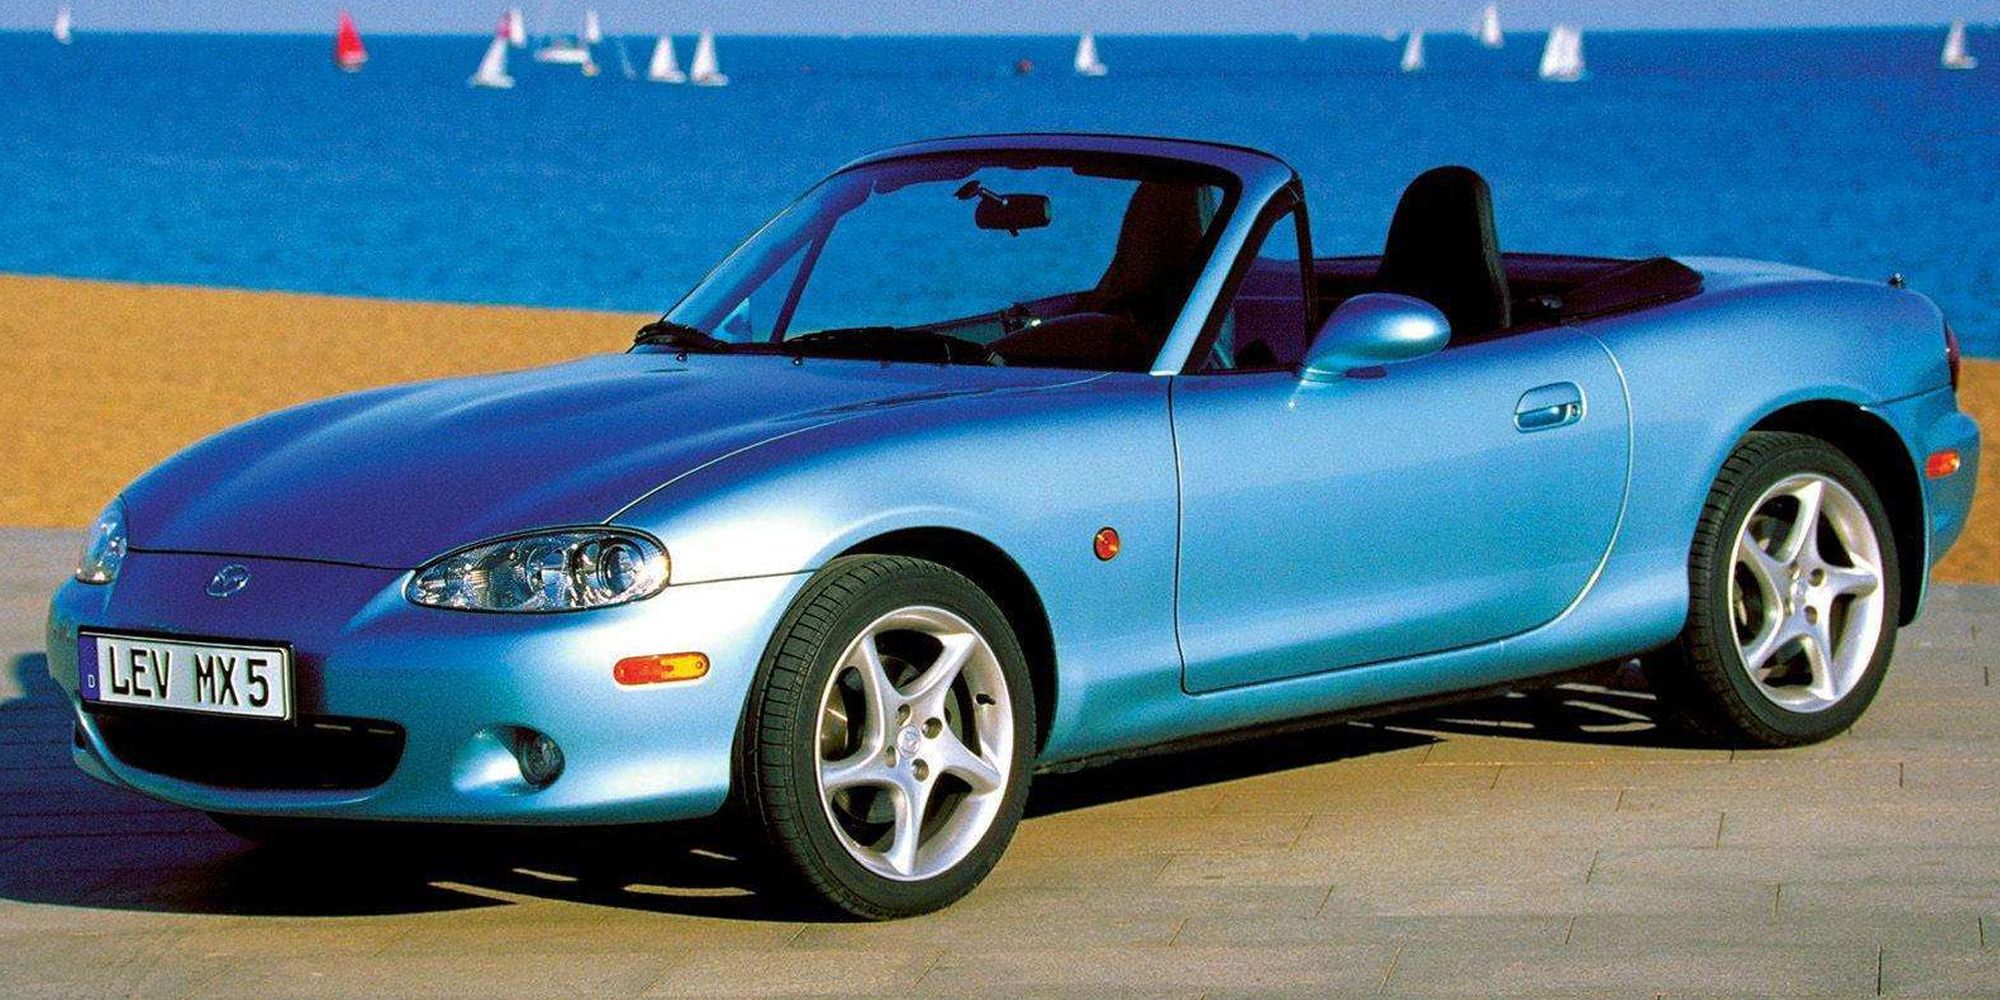 Front 3/4 view of a bright blue NB MX-5